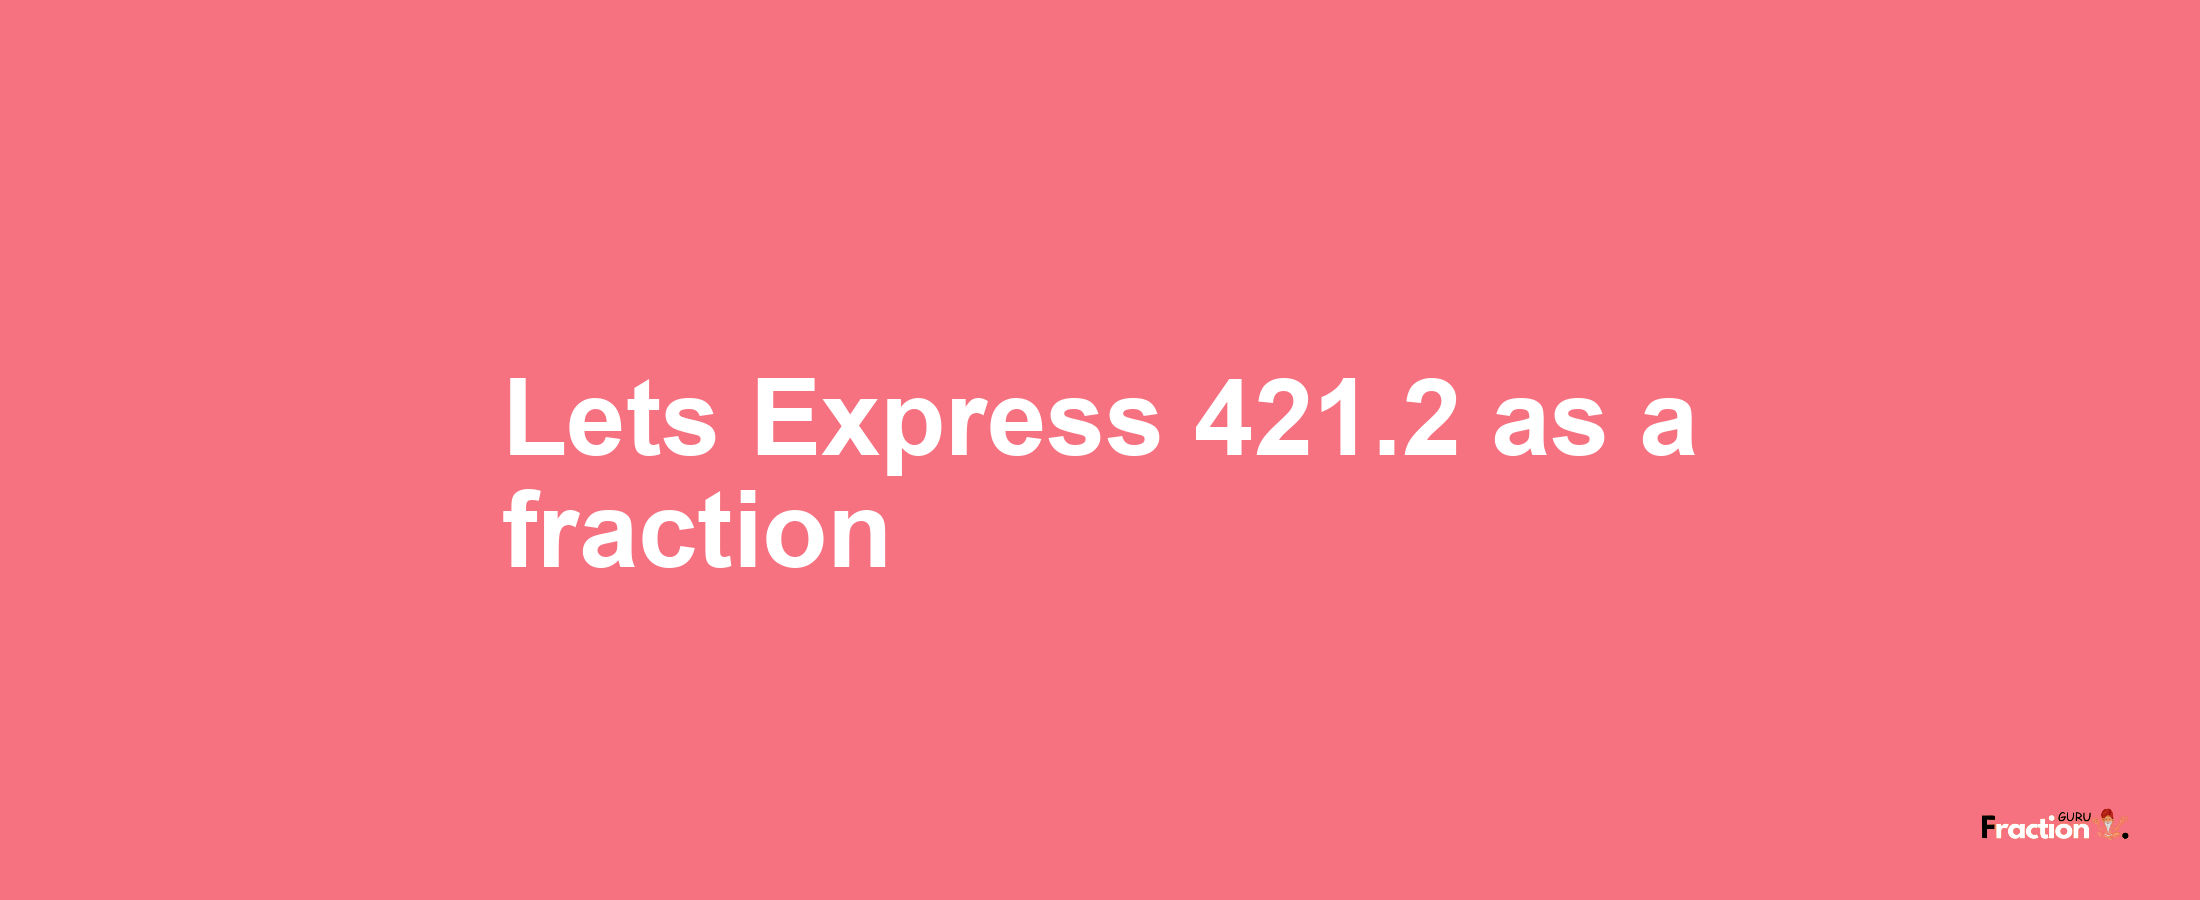 Lets Express 421.2 as afraction